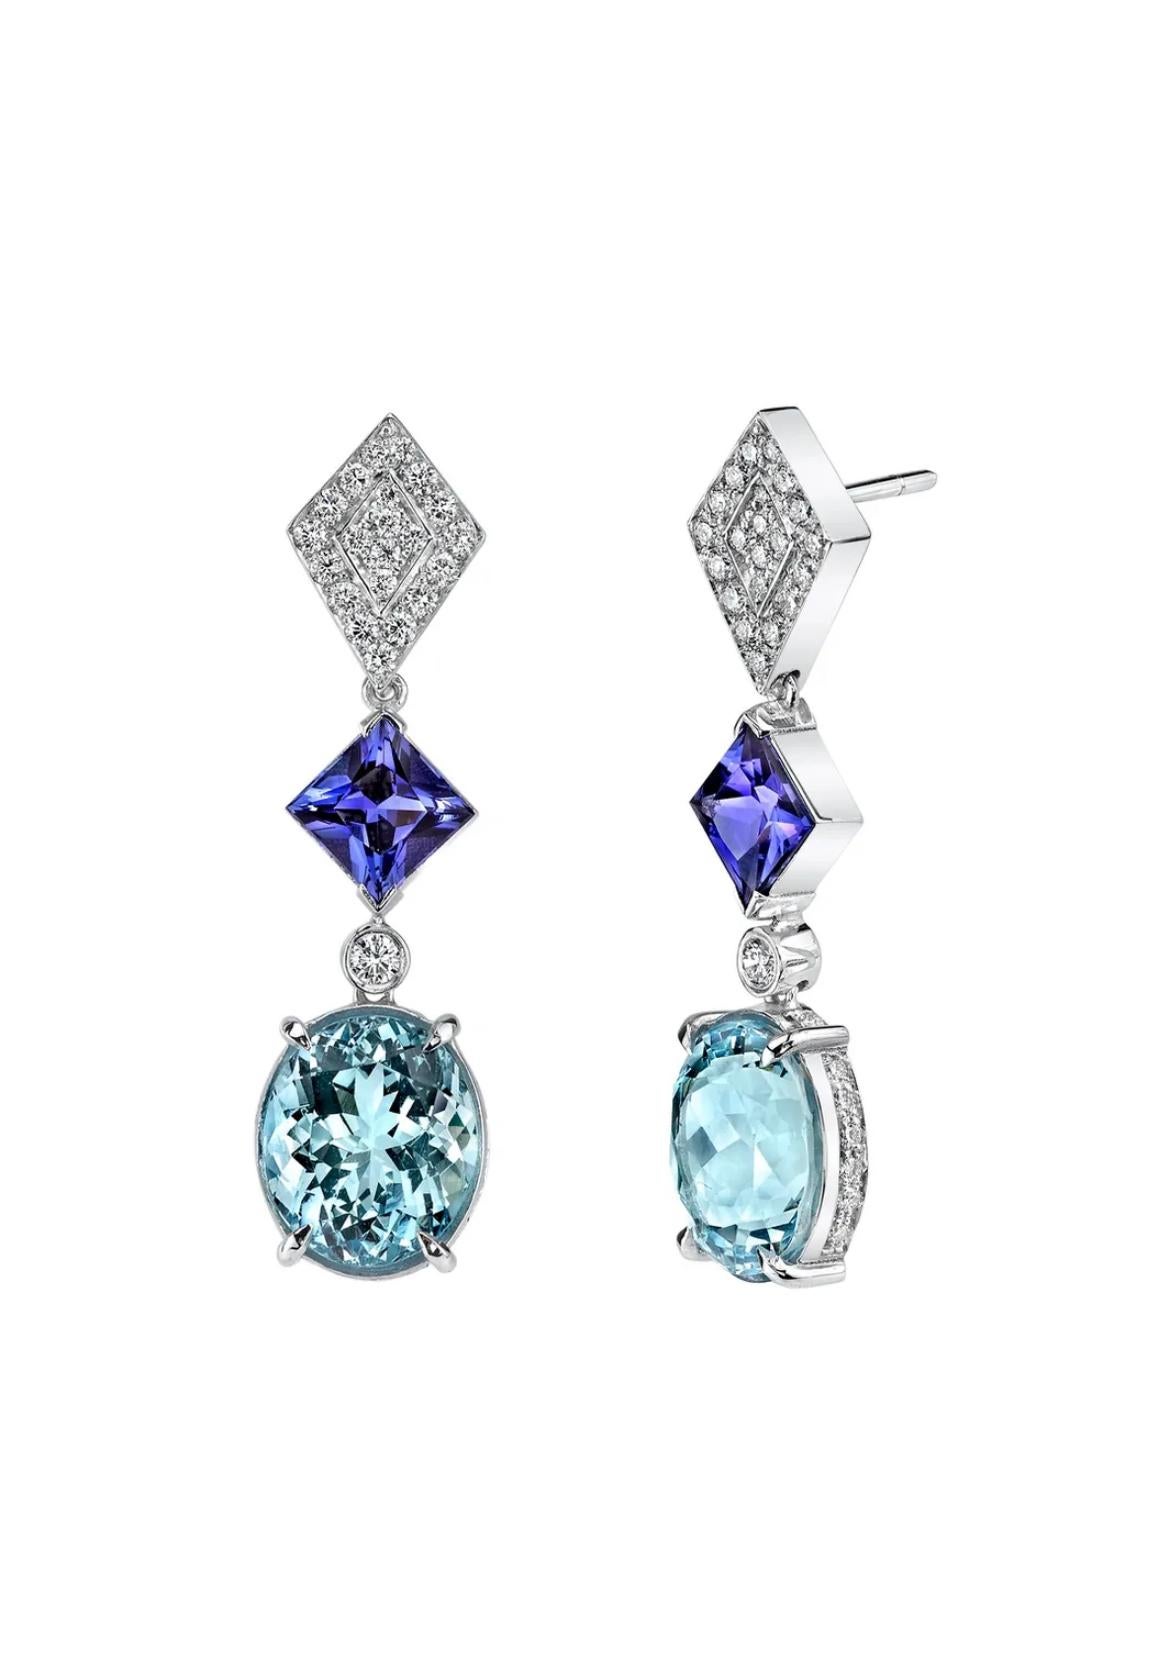 A exquisite pair of oval-cut Aquamarines, totaling 6.99 carats are the stars of these exuberant 18K white gold earrings. Joining the Aquamarines are two ravishing Tanzanites totaling 2.65 carats, encircled by numerous shimmering diamonds weighing a